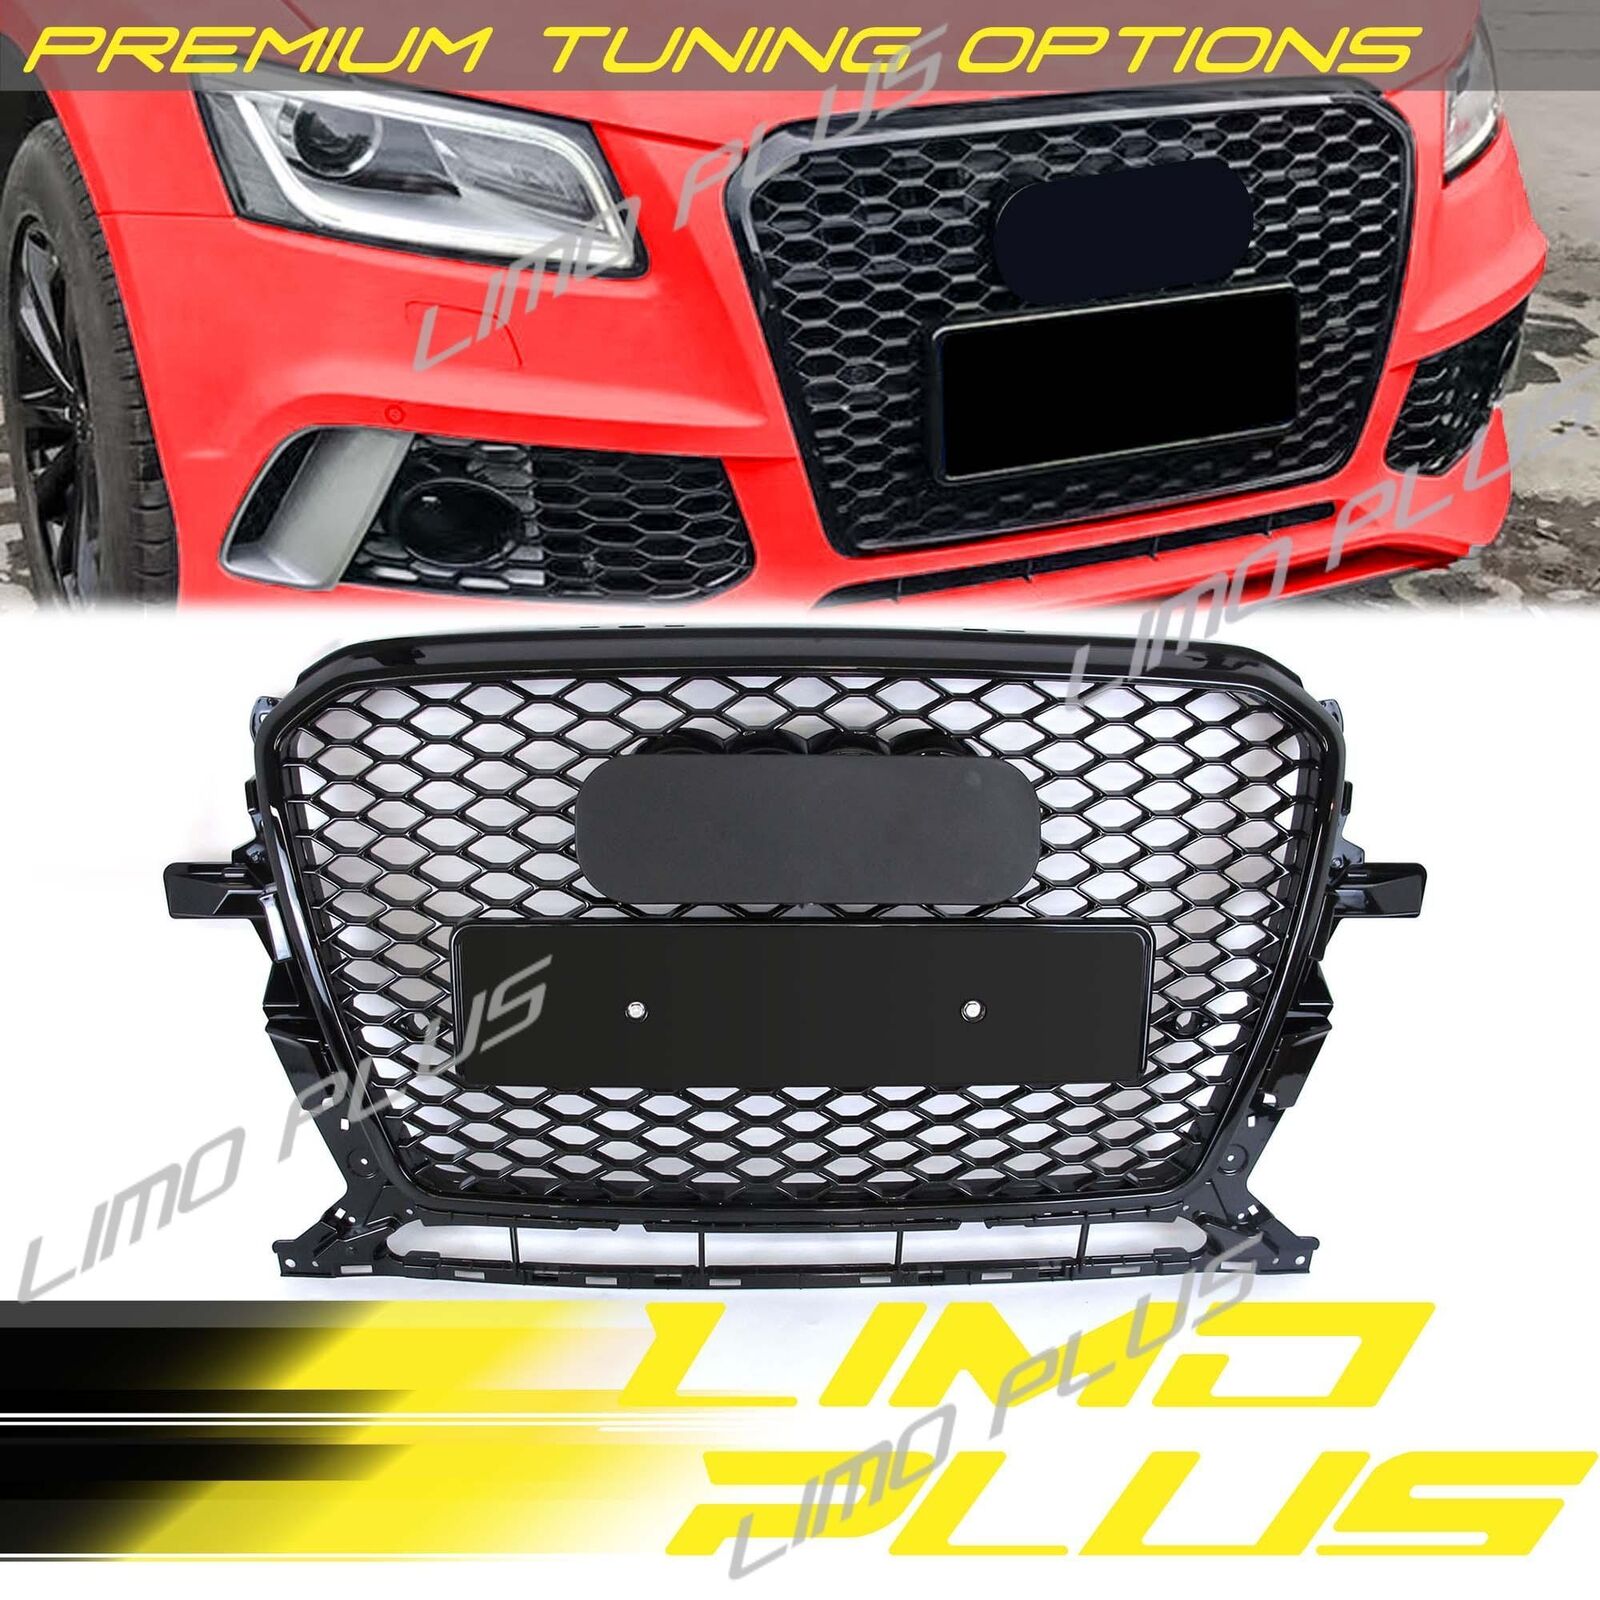 RSQ5 Style Glossy Black Front Grille Grill For Audi Q5 2013-2017 Non S-line